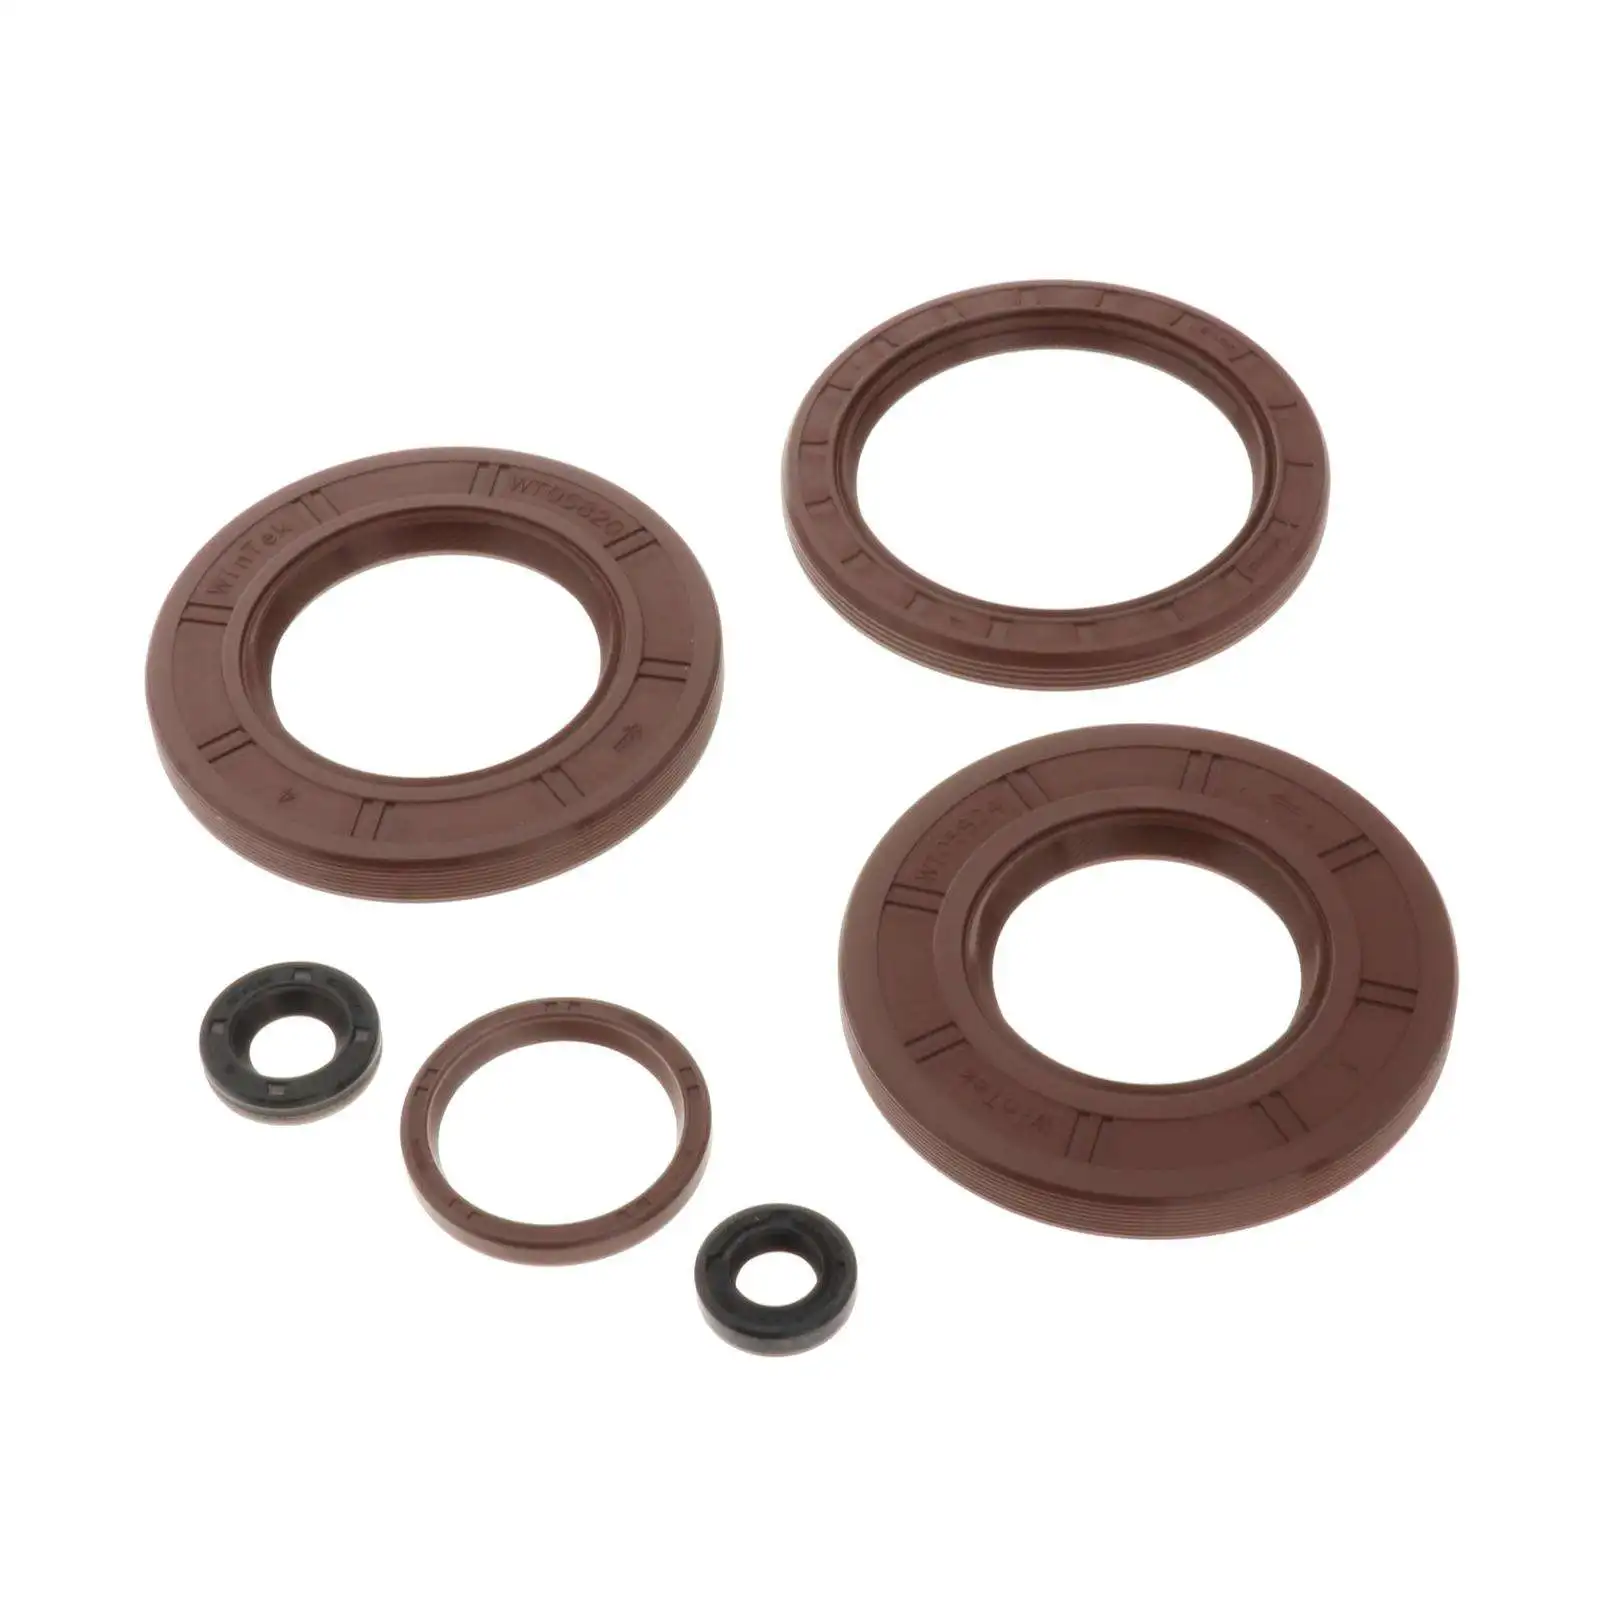 

8HP45 Transmission Oil Seal Package Oil Seal Set ZF8 Speed for X1 X3 X5 for Land Rover 319080AK 8HP45 for Jaguar